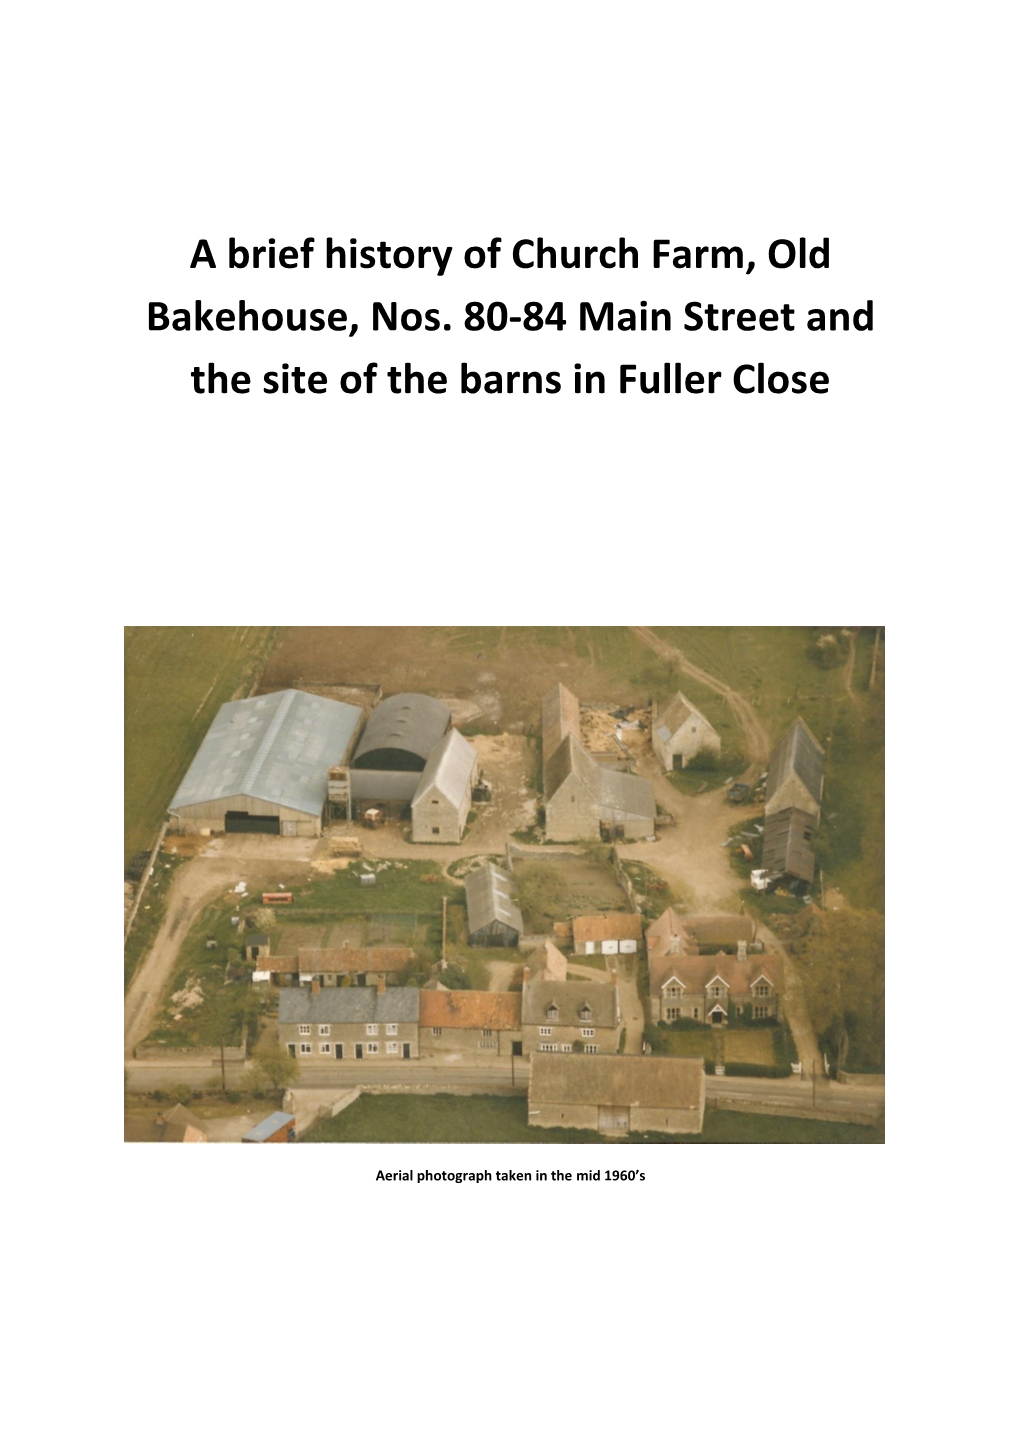 A Brief History of Church Farm, Old Bakehouse, Nos. 80-84 Main Street and the Site of the Barns in Fuller Close